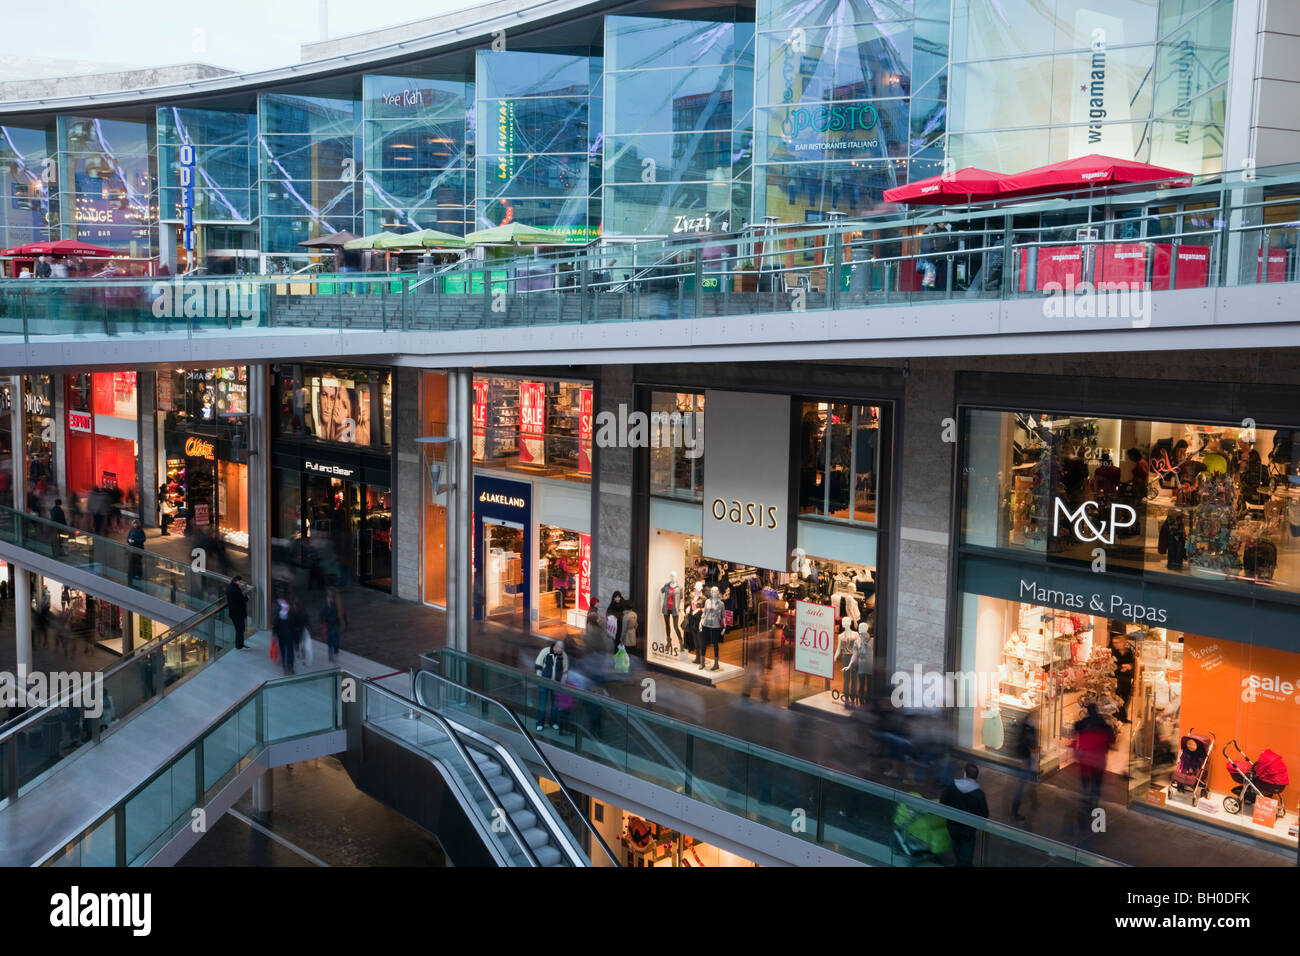 Liverpool, Merseyside, England, UK, Europe. Shops and cafes in Stock Photo, Royalty Free Image ...